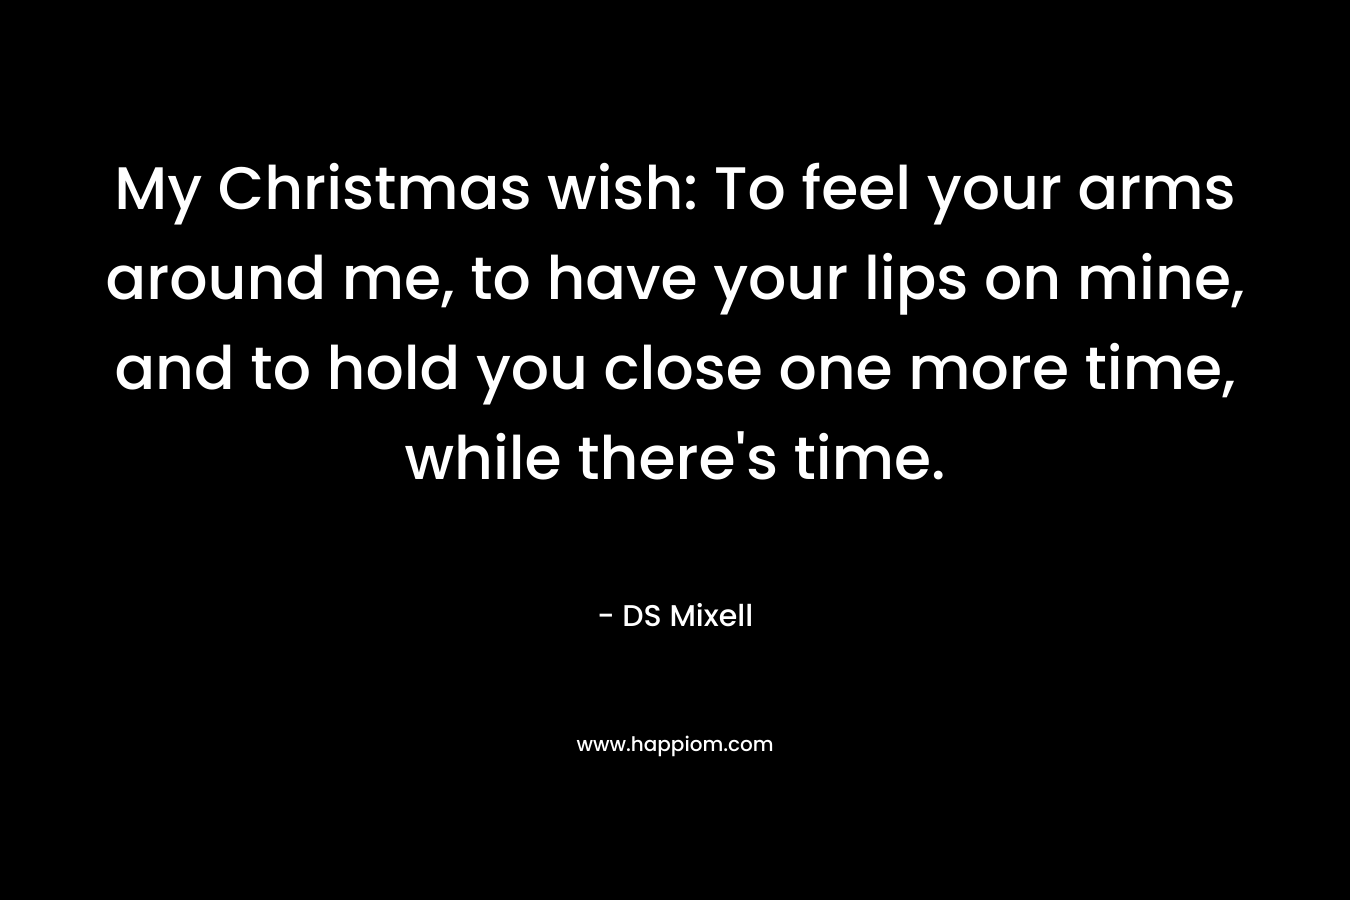 My Christmas wish: To feel your arms around me, to have your lips on mine, and to hold you close one more time, while there’s time. – DS Mixell